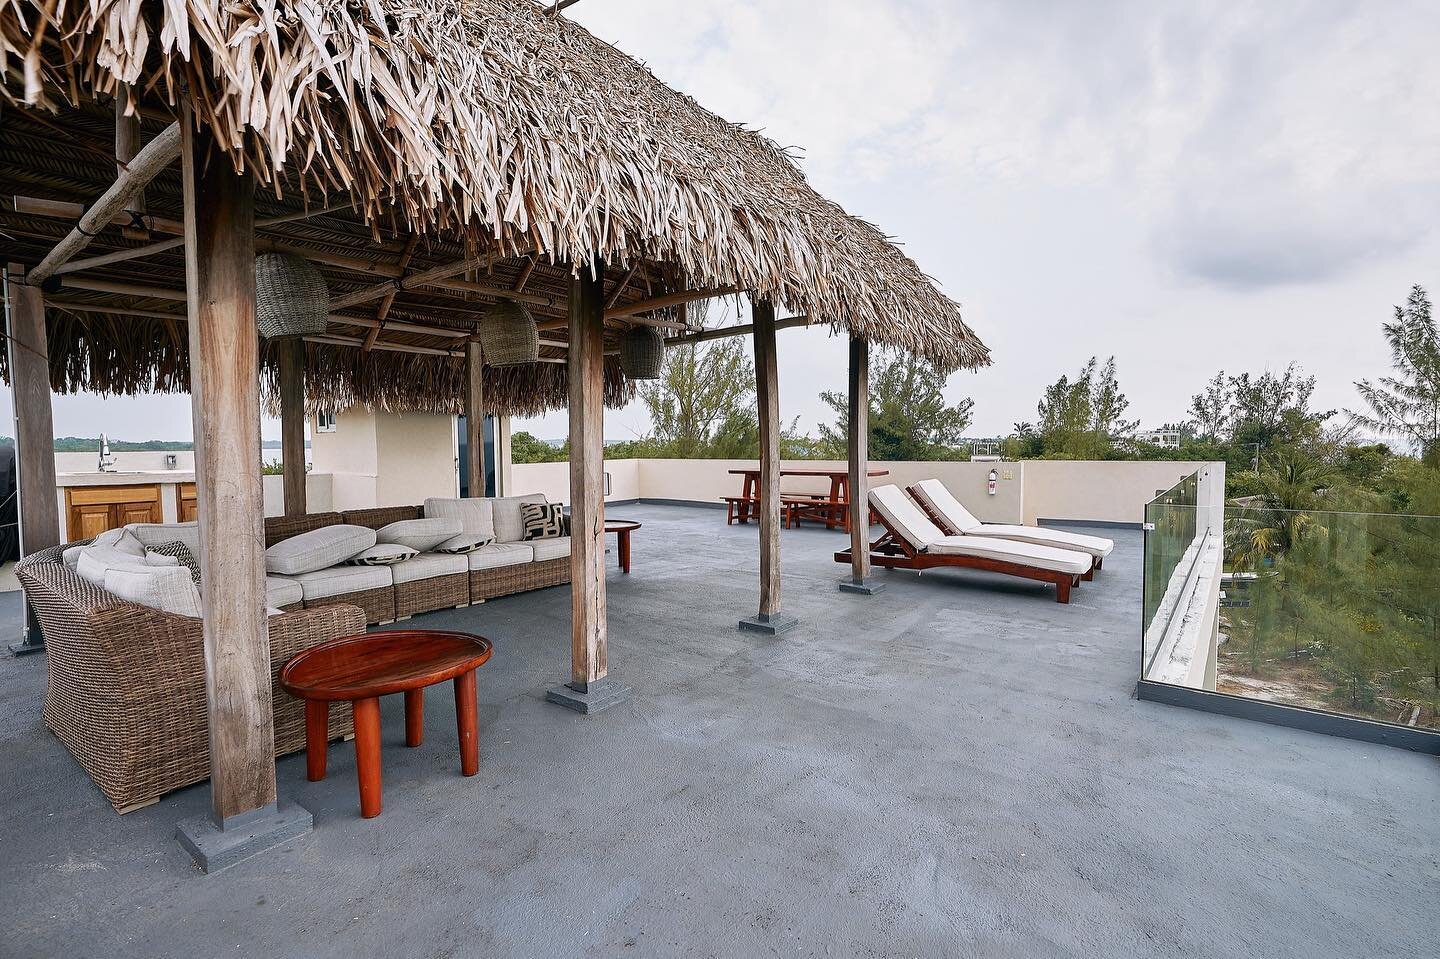 Enjoy sunset and sunrise from your own private rooftop at Hideaway 🌊🏝

#placencia #belize #travelbelize #ocean